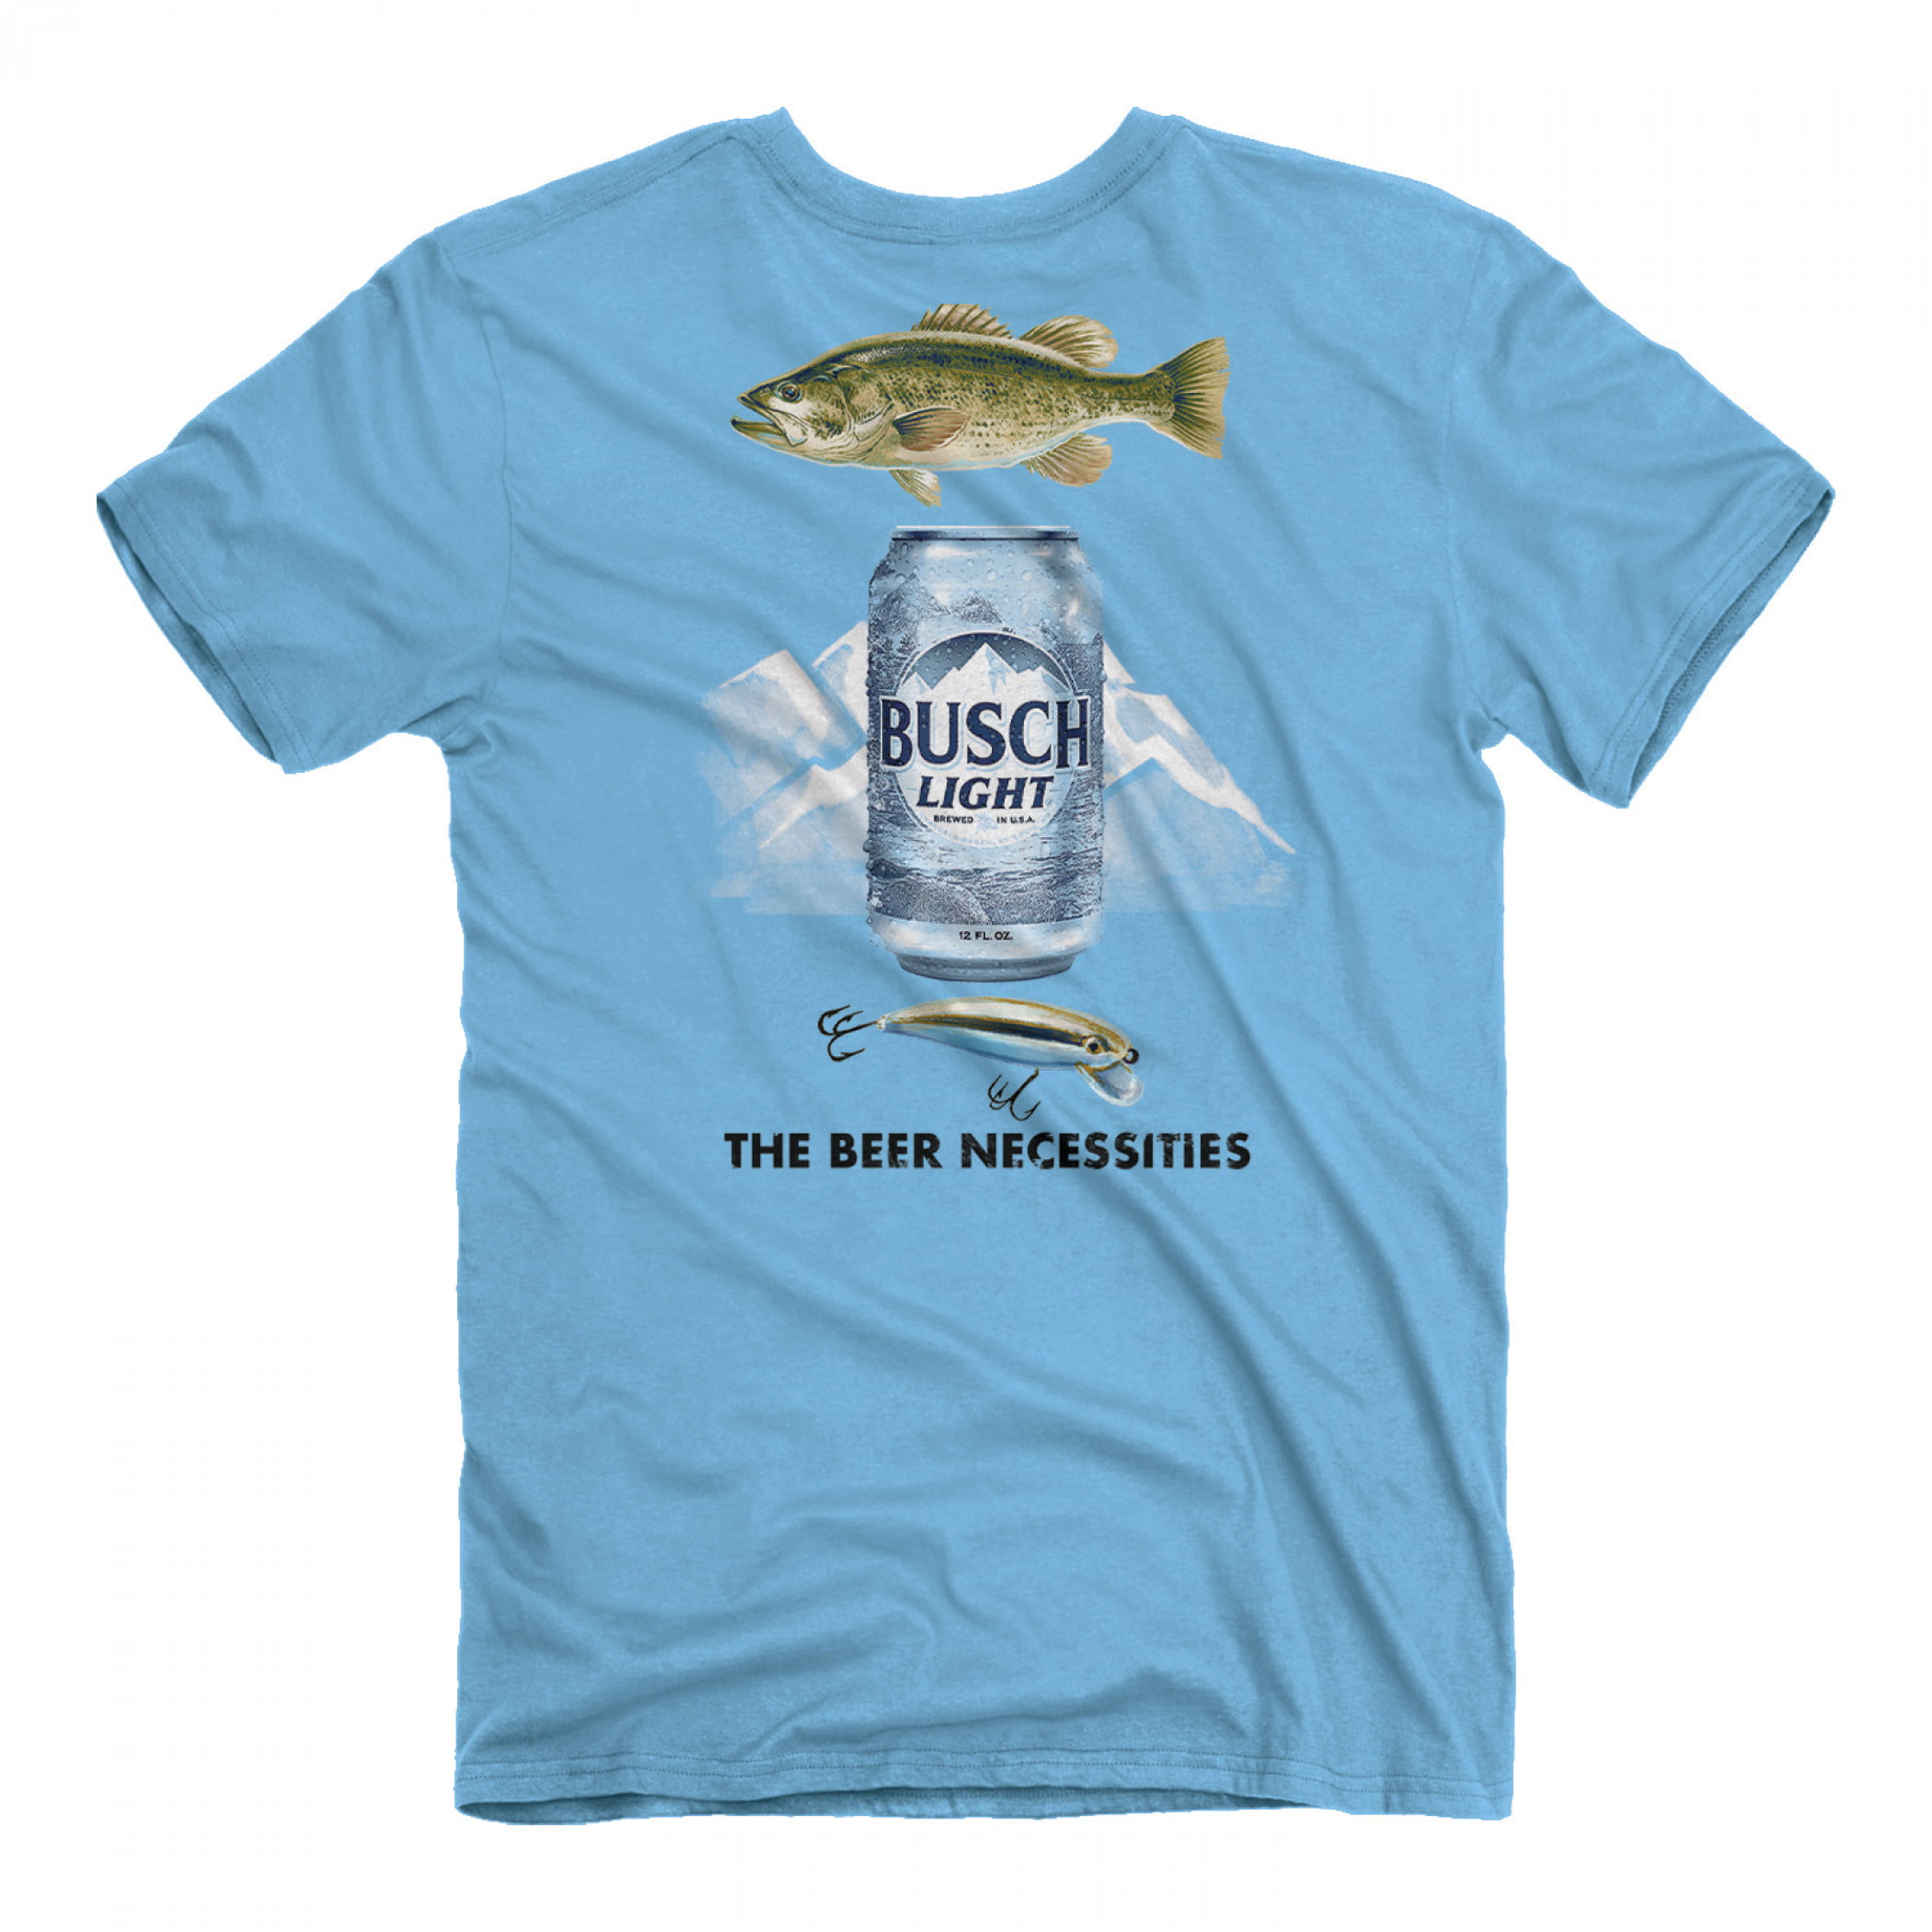 Busch Light Fishing The Beer Necessities Front and Back Print T-Shirt-2XLarge  